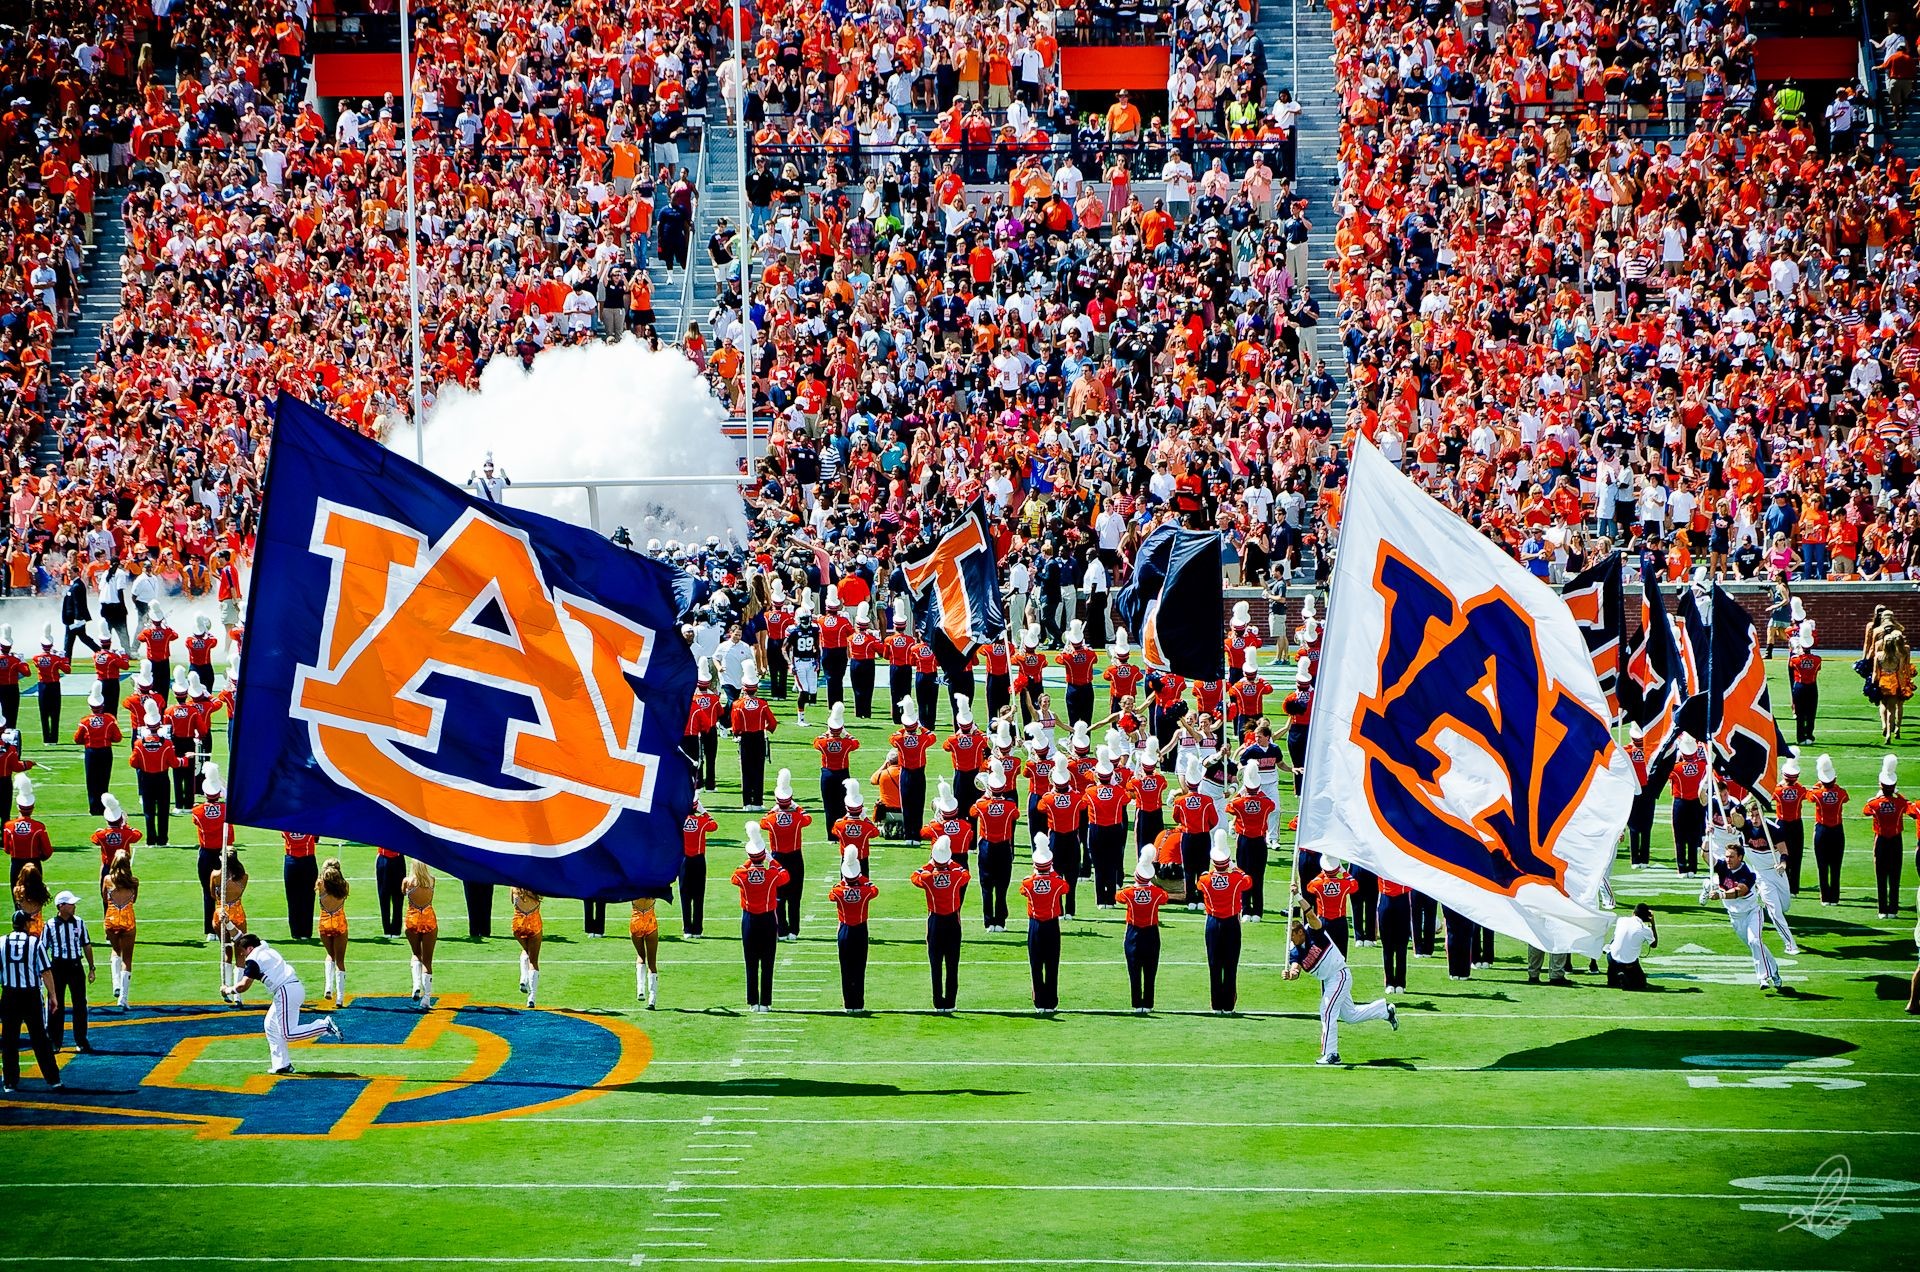 1920x1272 1920 x 1272 px Desktop Backgrounds - auburn tigers picture by Buster Backer  for - TWD